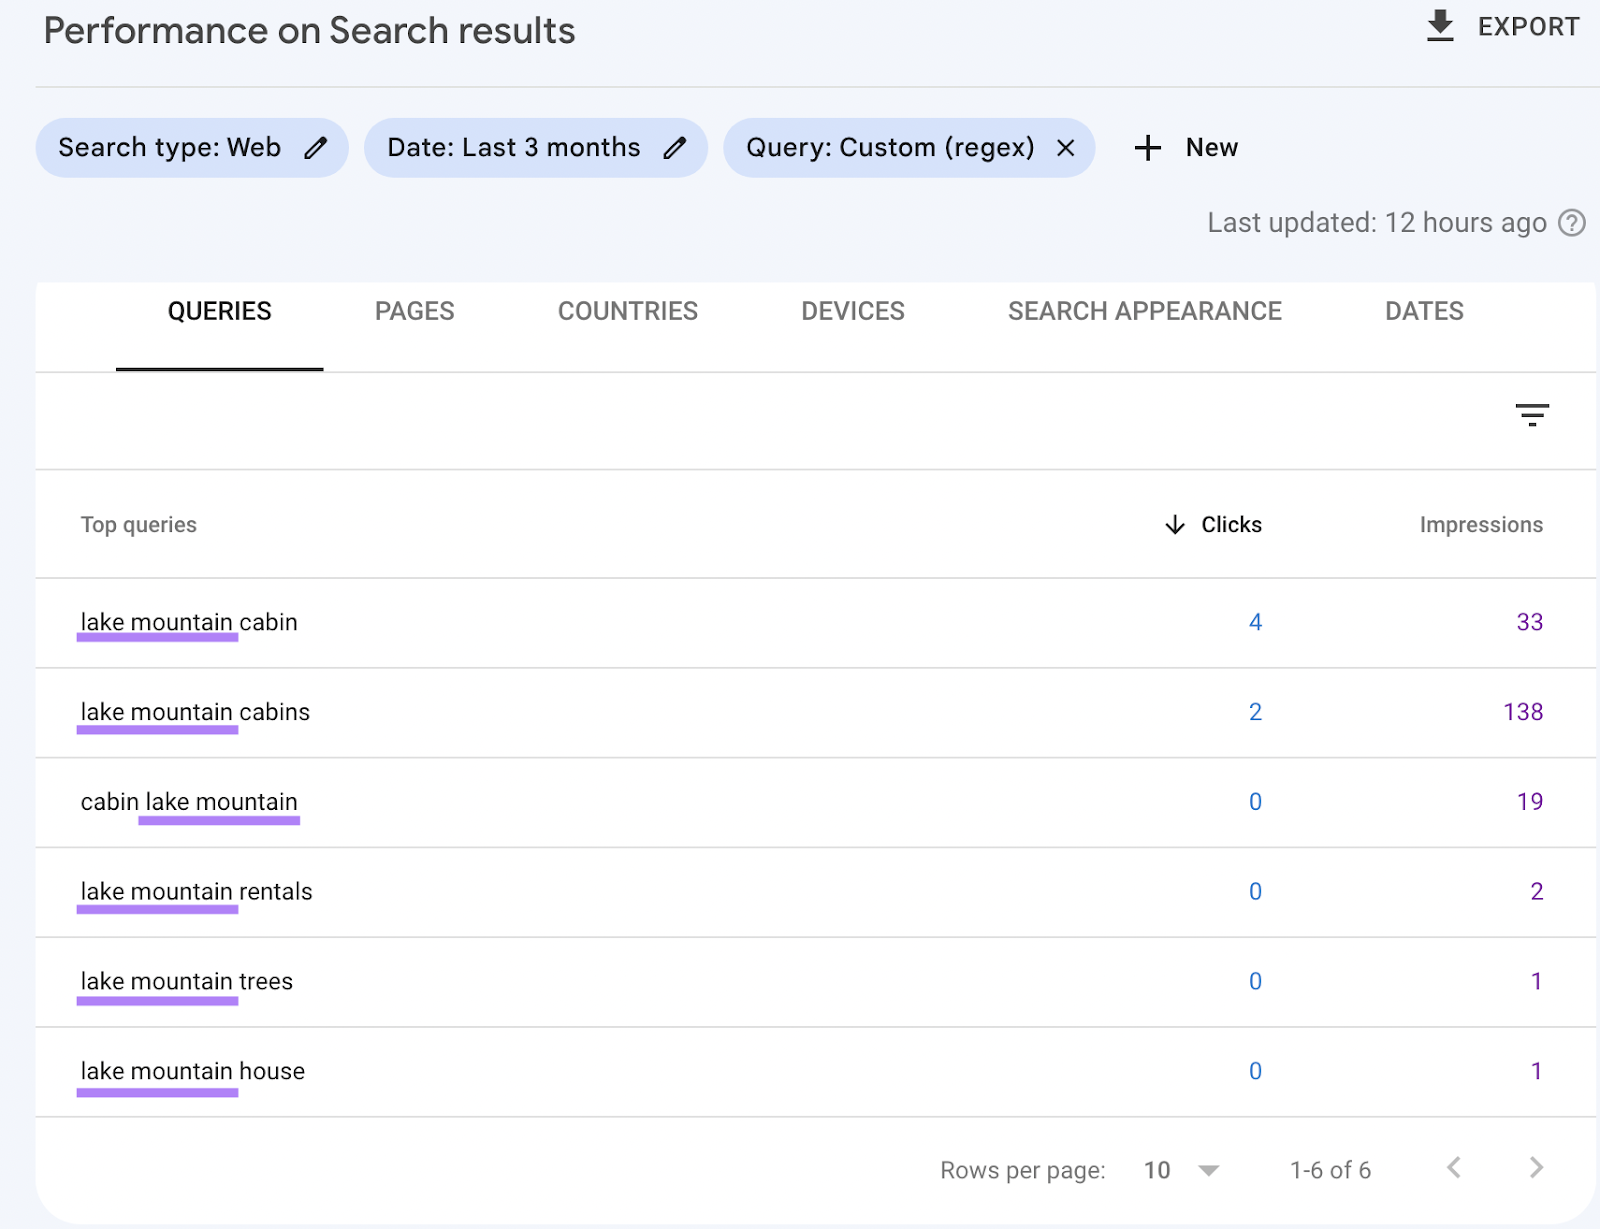 "Queries" section of the “Performance by Search results” report